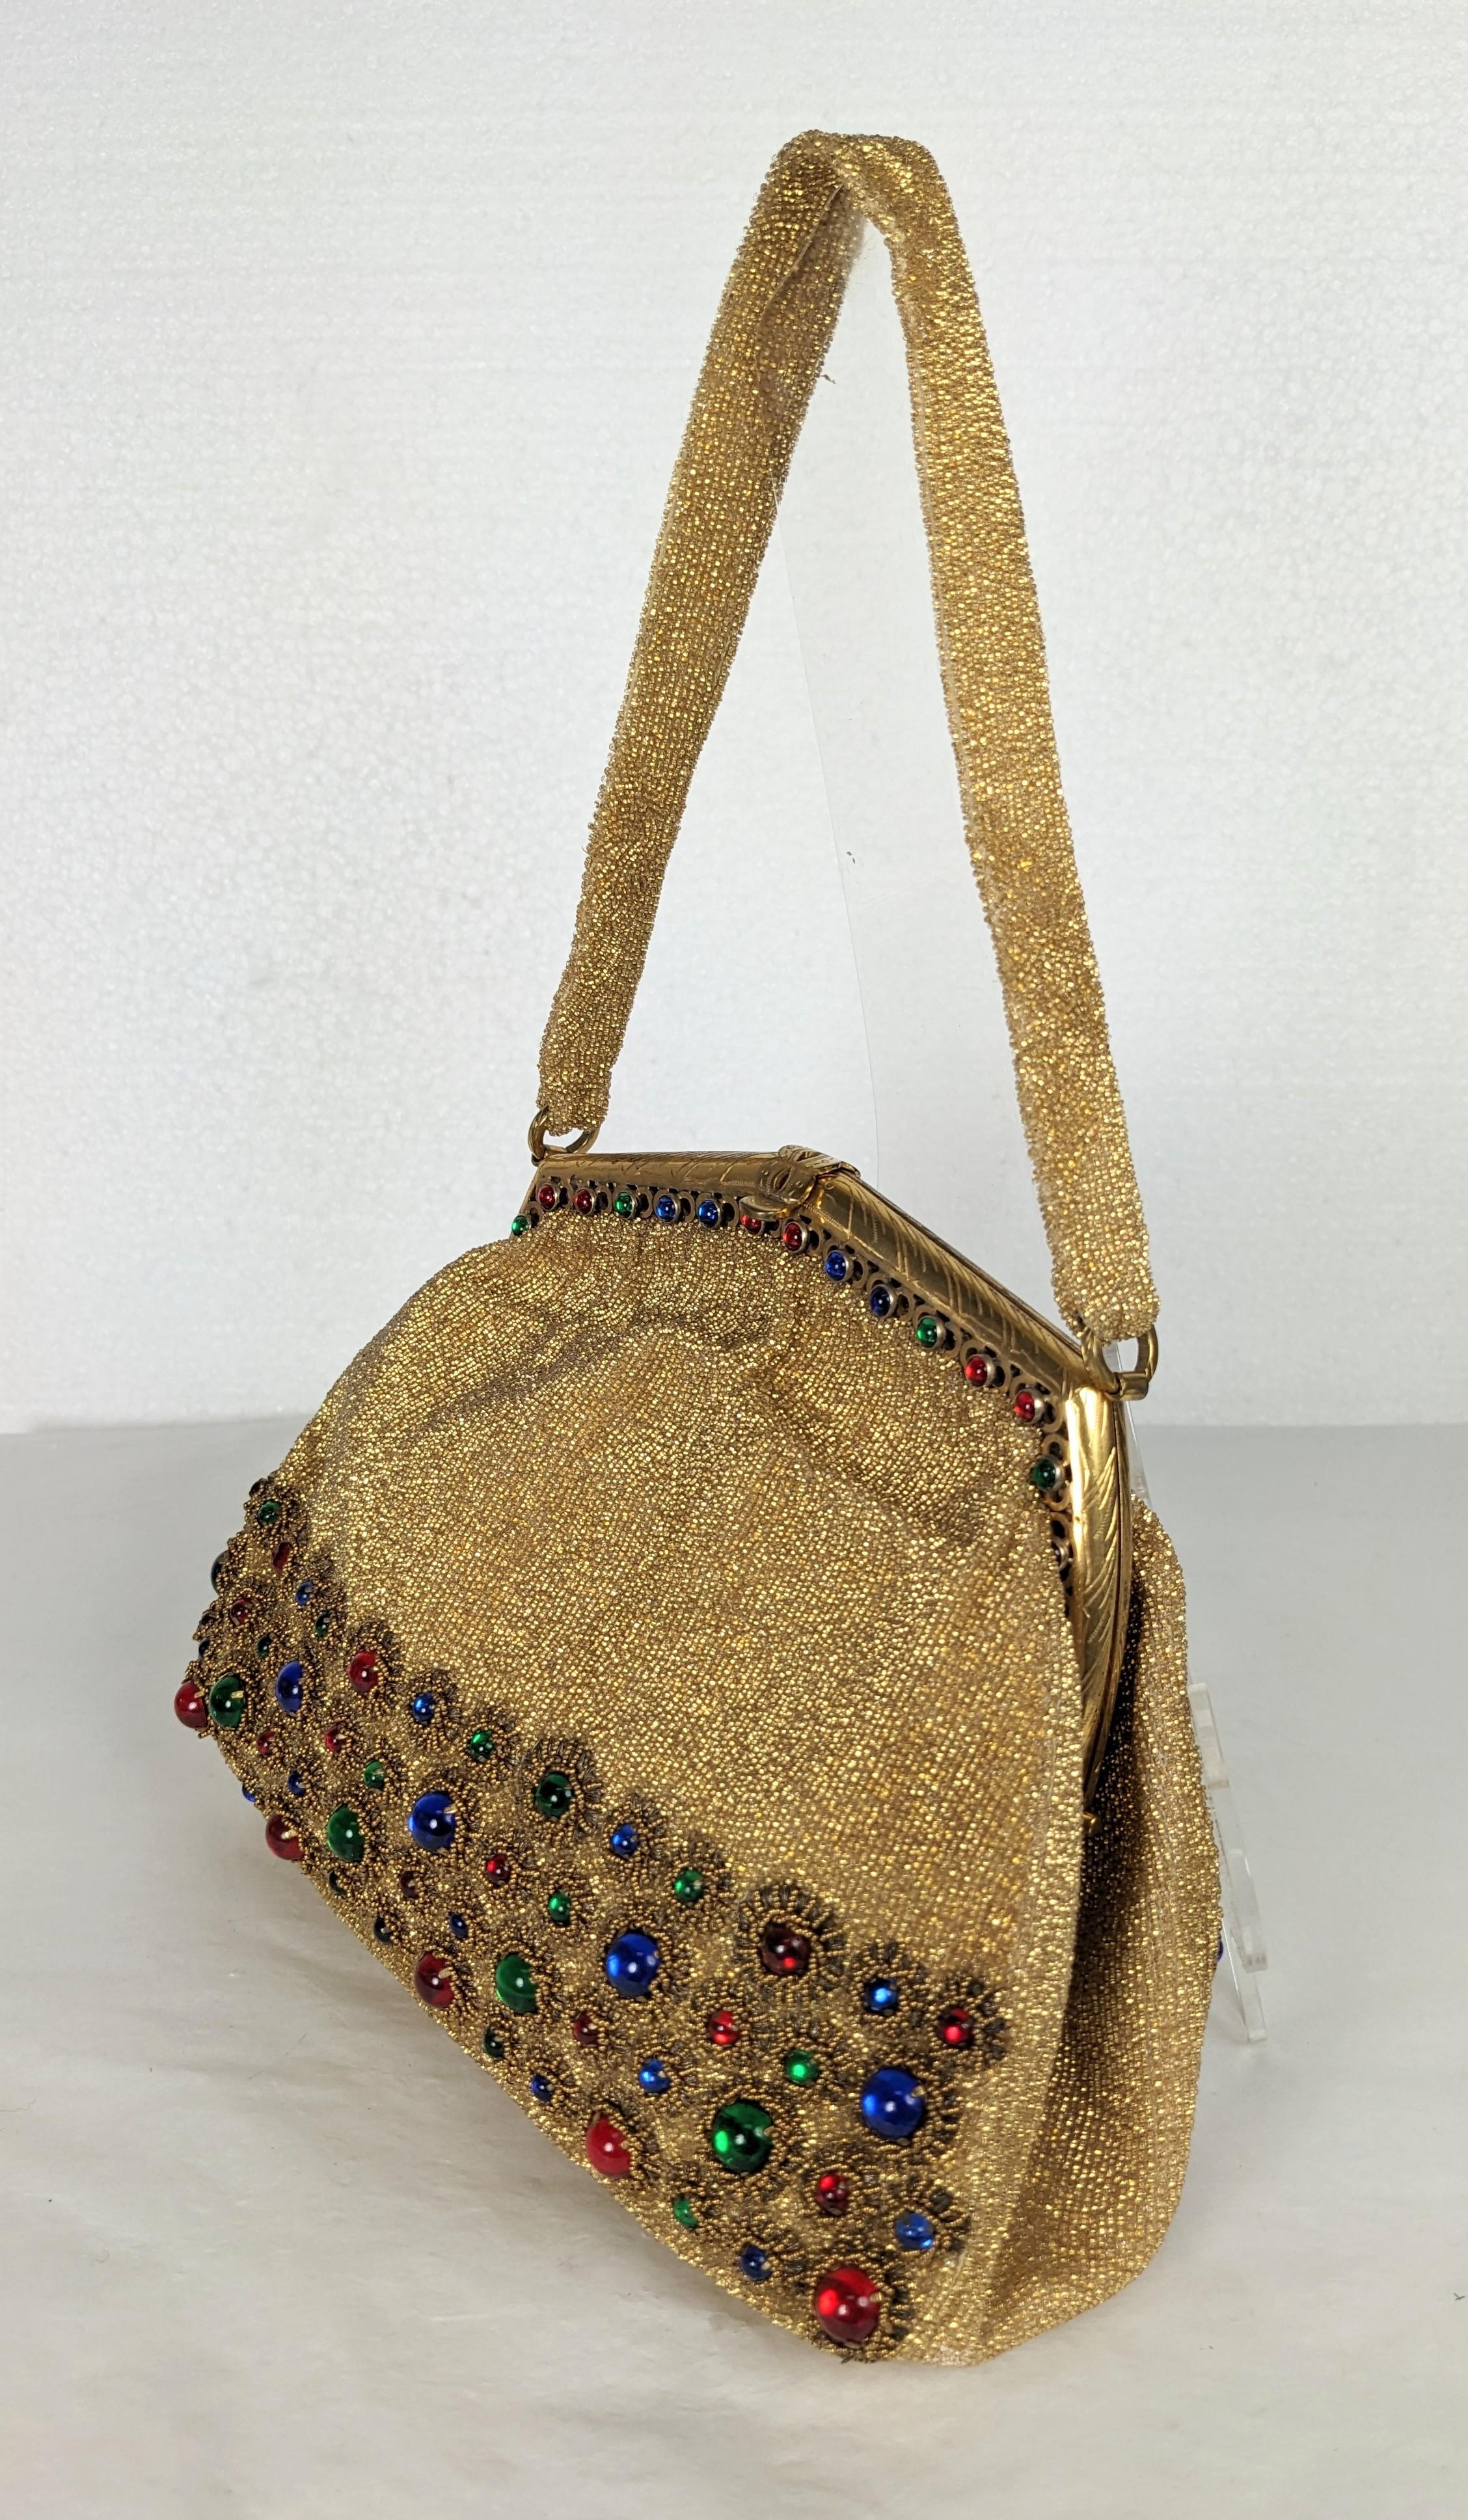 Elaborate Beaded French Evening Bag, Saks Fifth Ave. In Excellent Condition For Sale In New York, NY